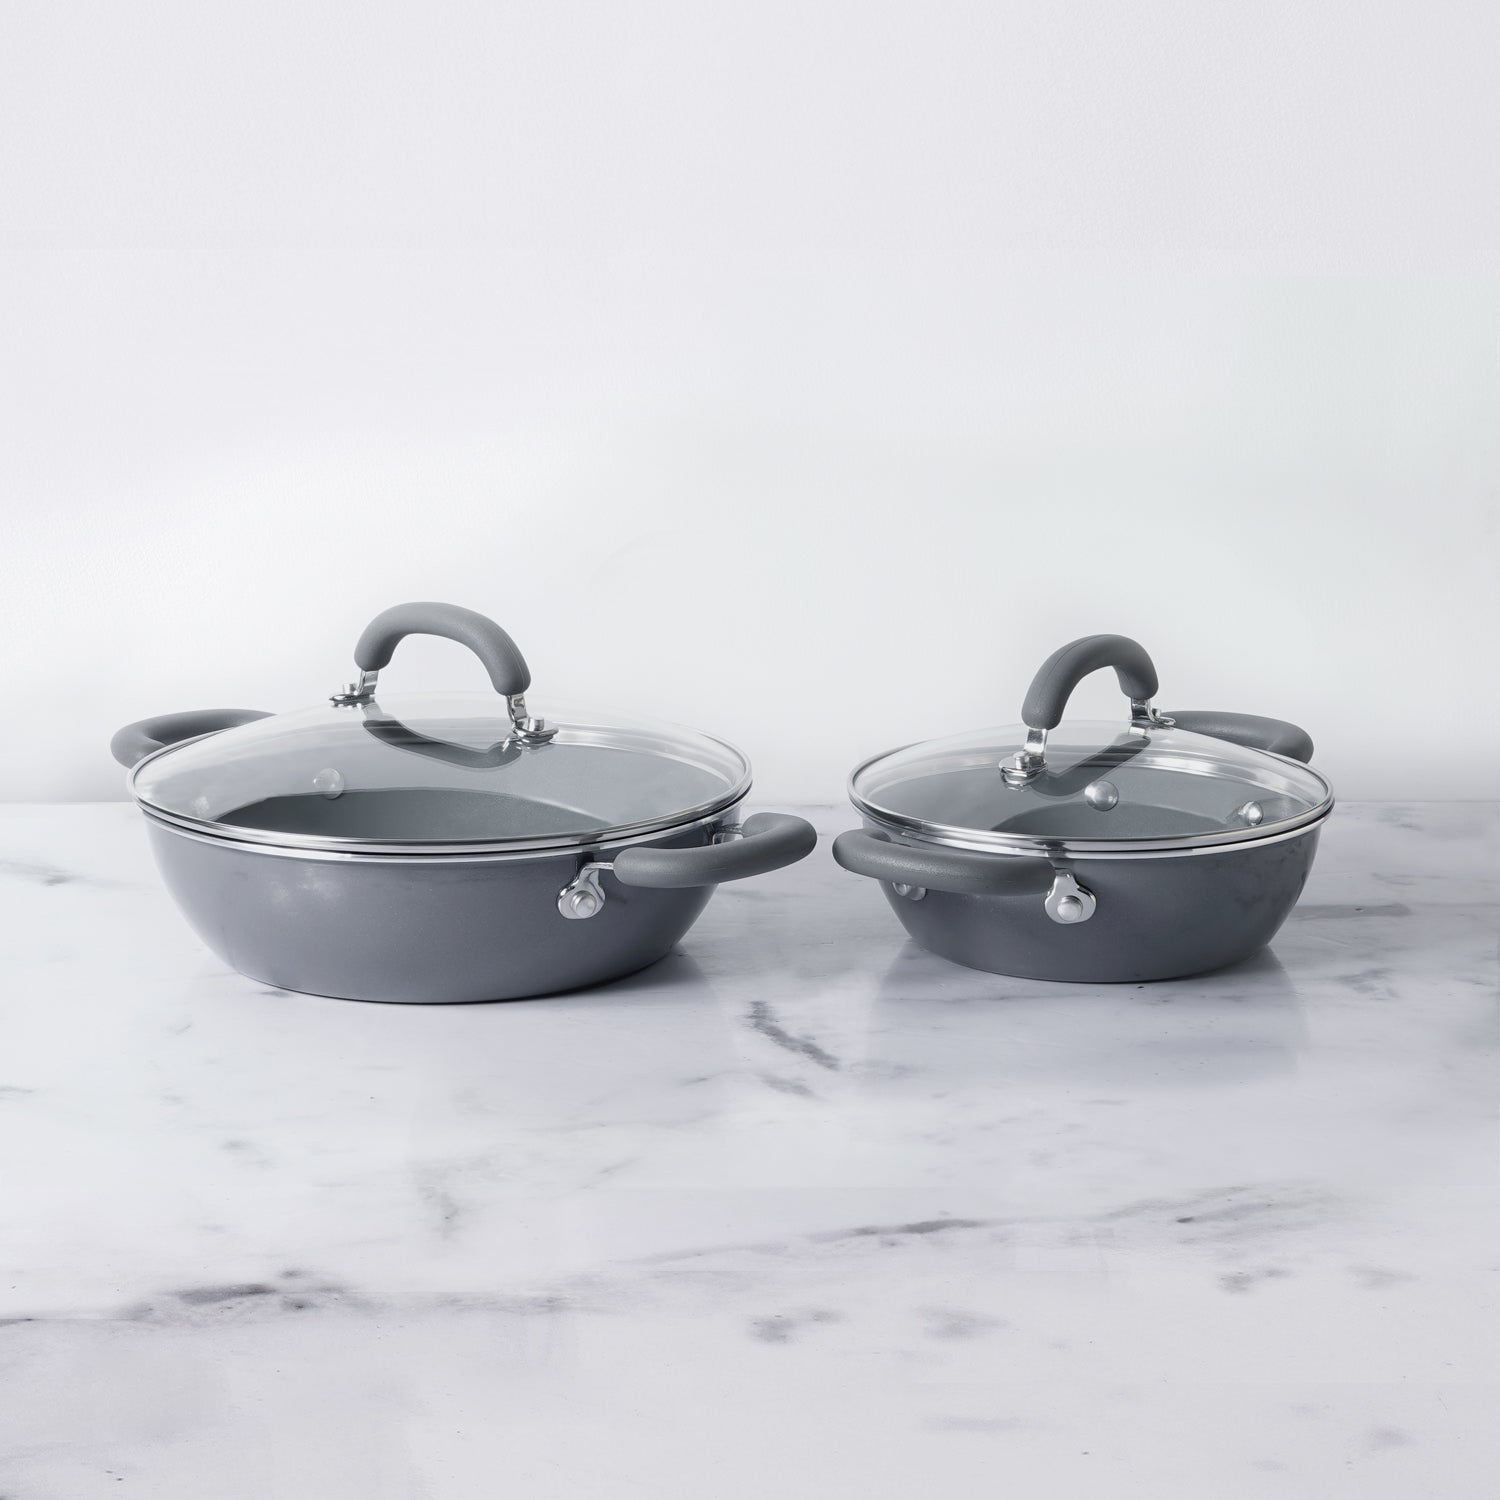 Meyer Anzen - 100% Safe Ceramic Cookware Range First Time In India